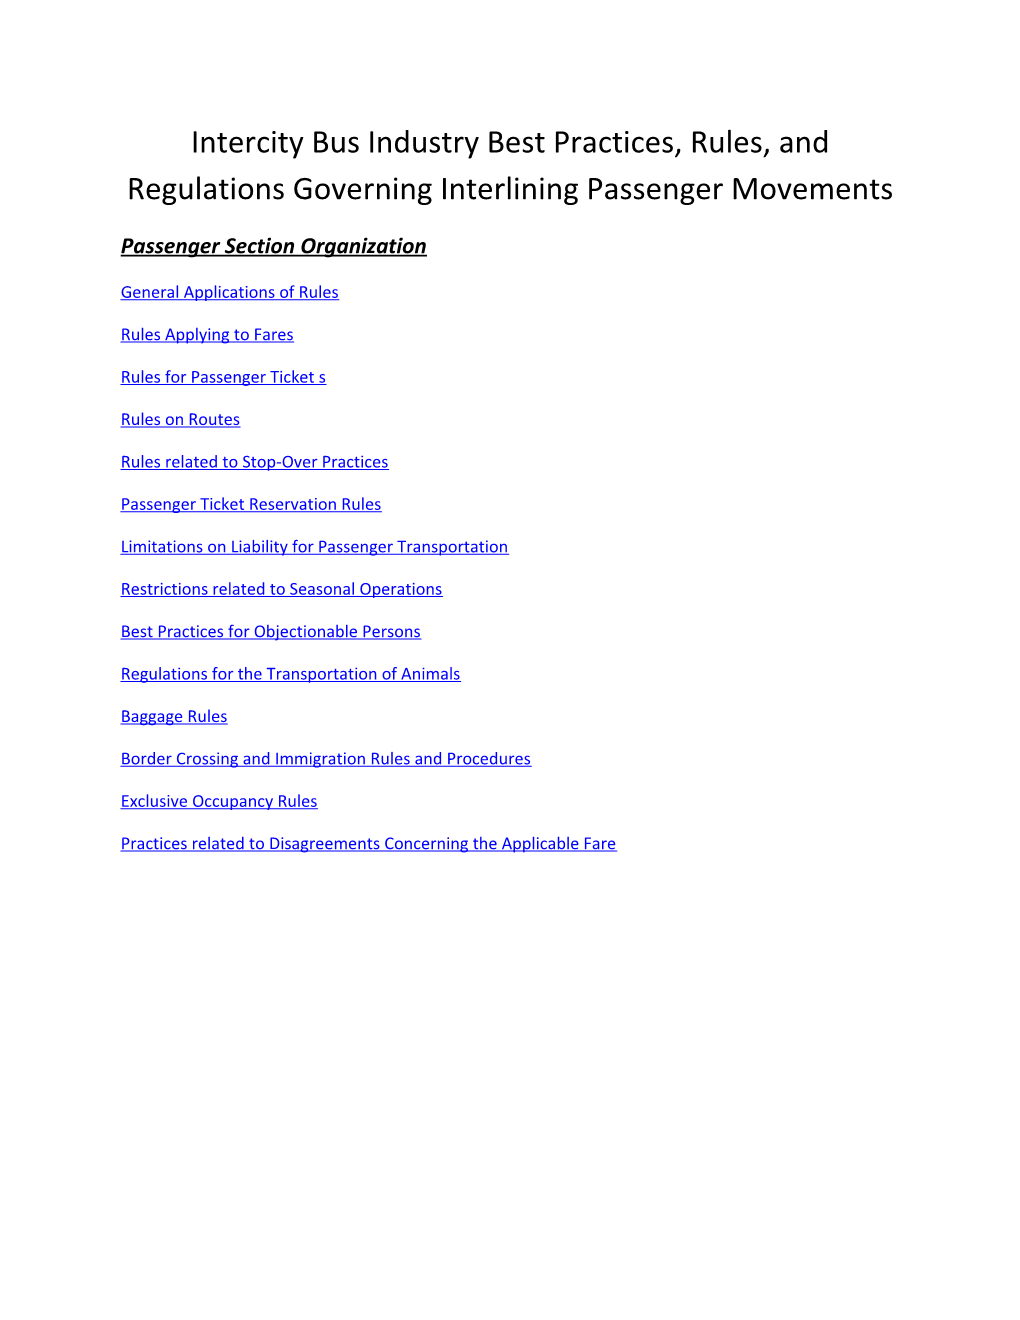 Interlining Passenger Industry Best Practices, Rules, and Regulations